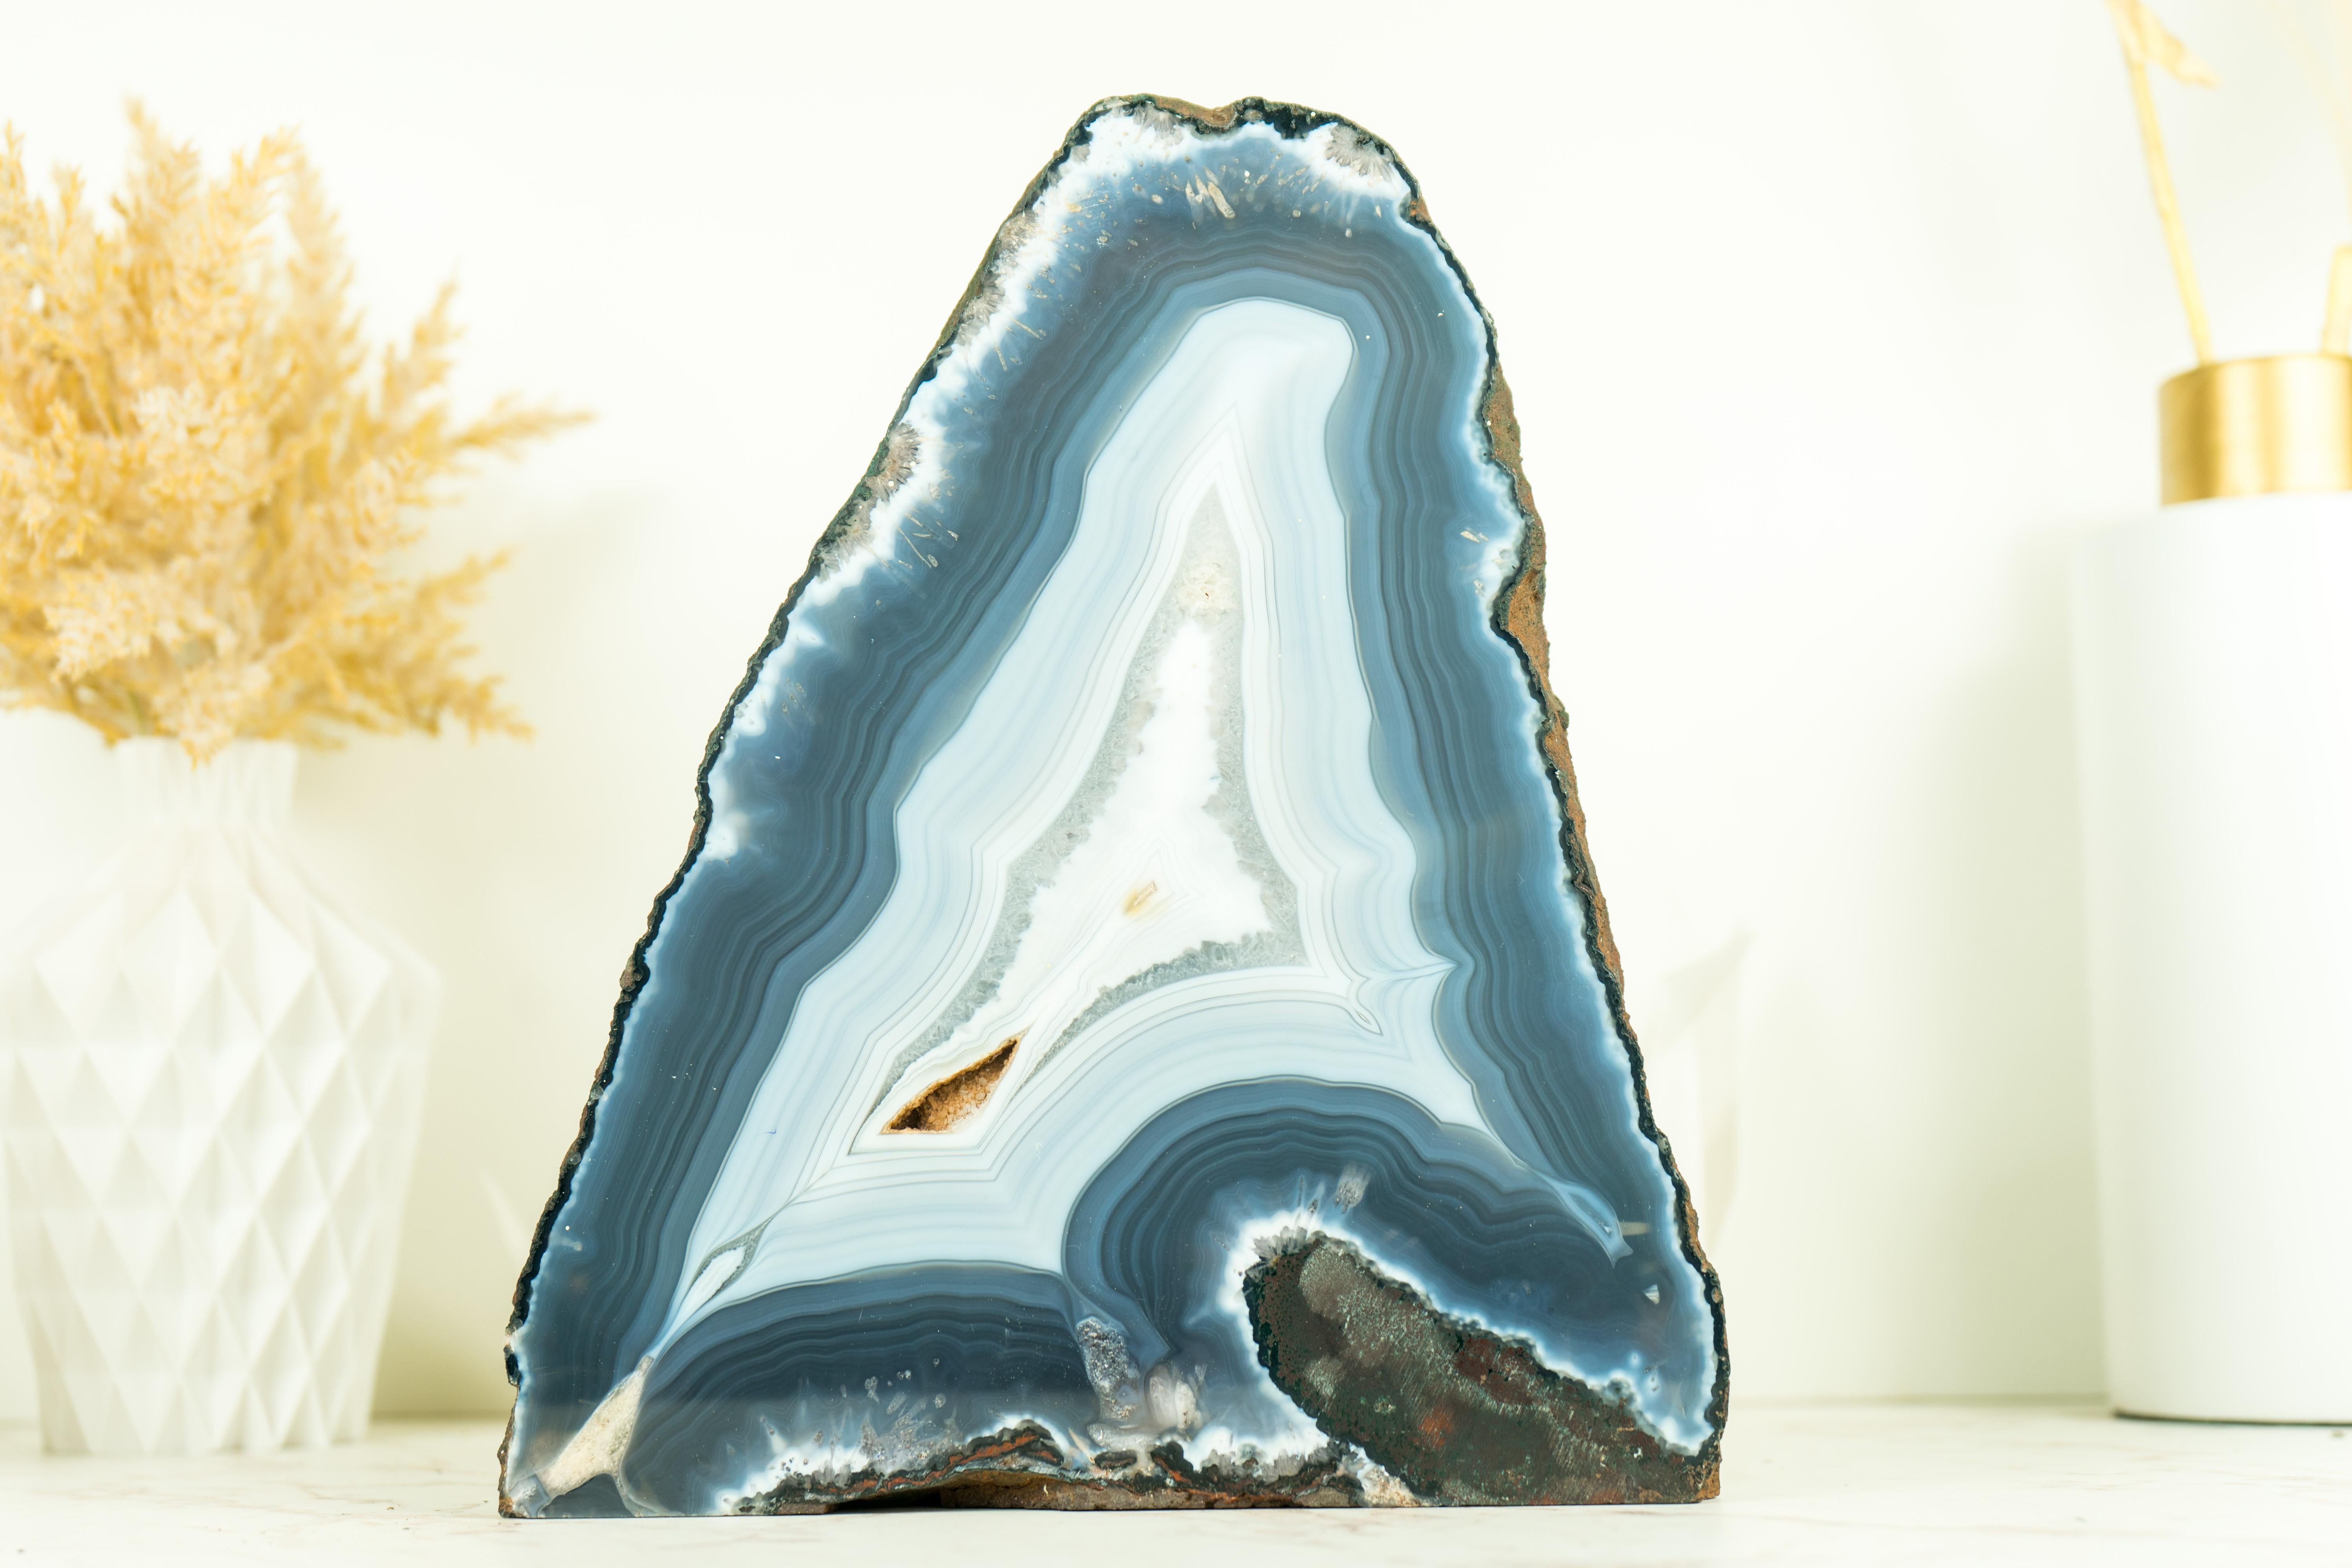 With Blue and White Laces, this Blue Banded Agate geode is a rare find, gorgeously showcasing what nature is capable of making. This specific specimen comes from our Father's collection of world-class agates and from time to time he makes a specimen